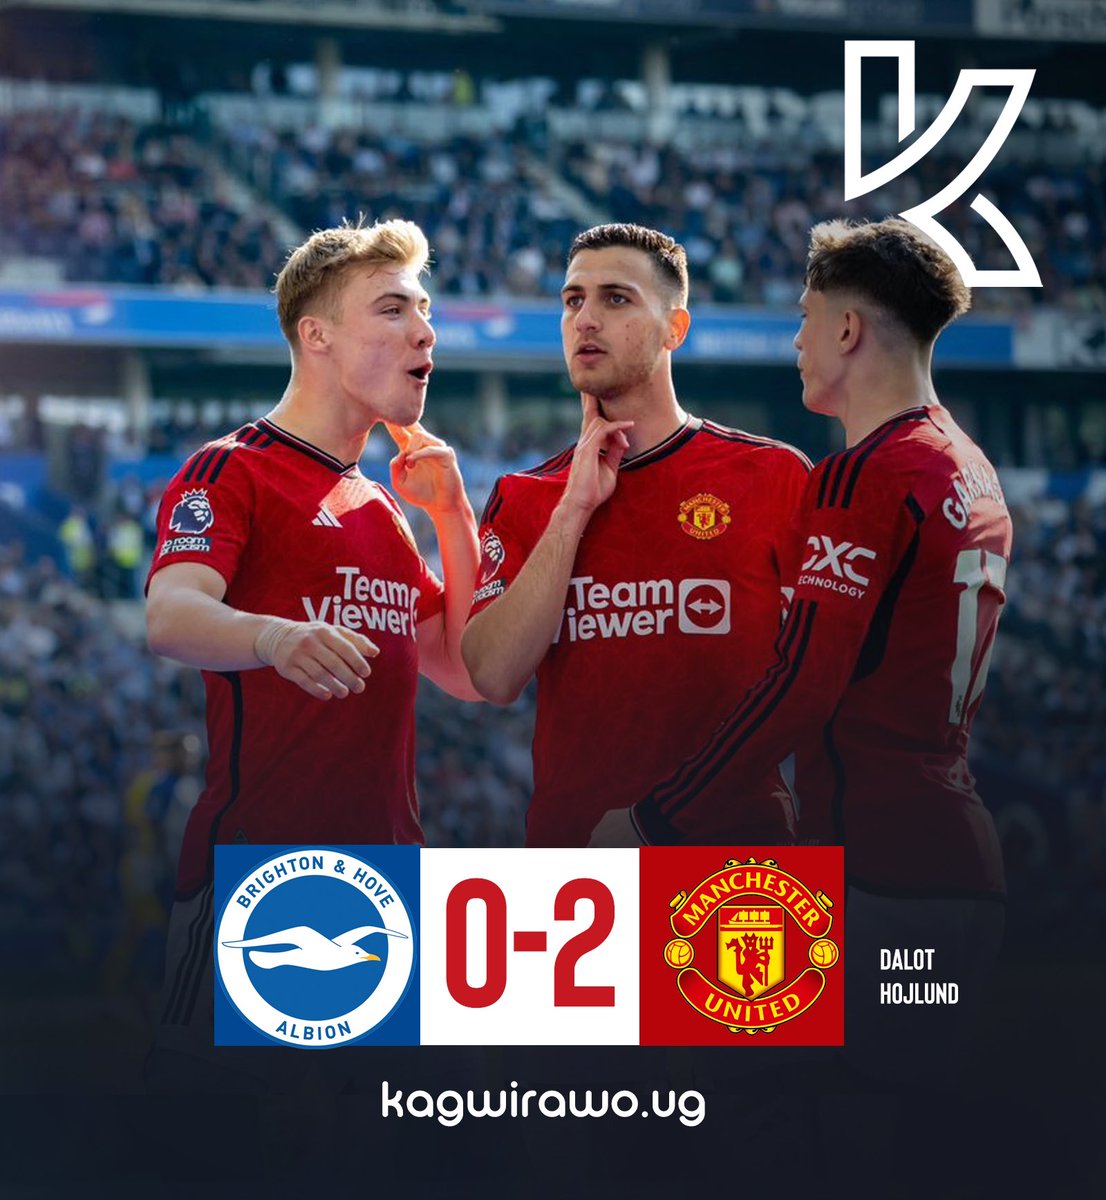 United win their last game of the season